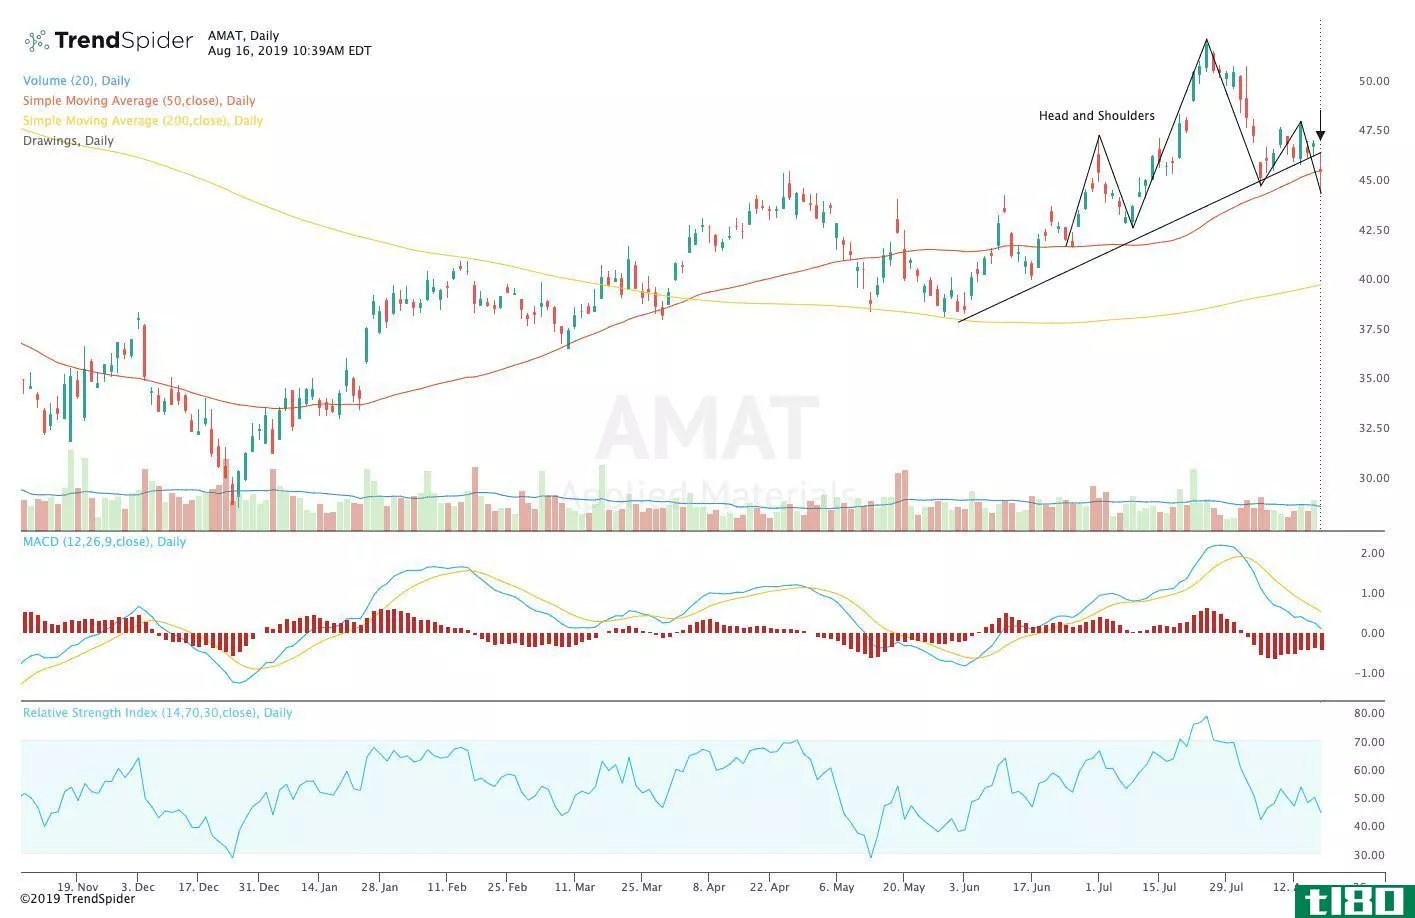 Chart showing the share price performance of Applied Materials, Inc. (AMAT)